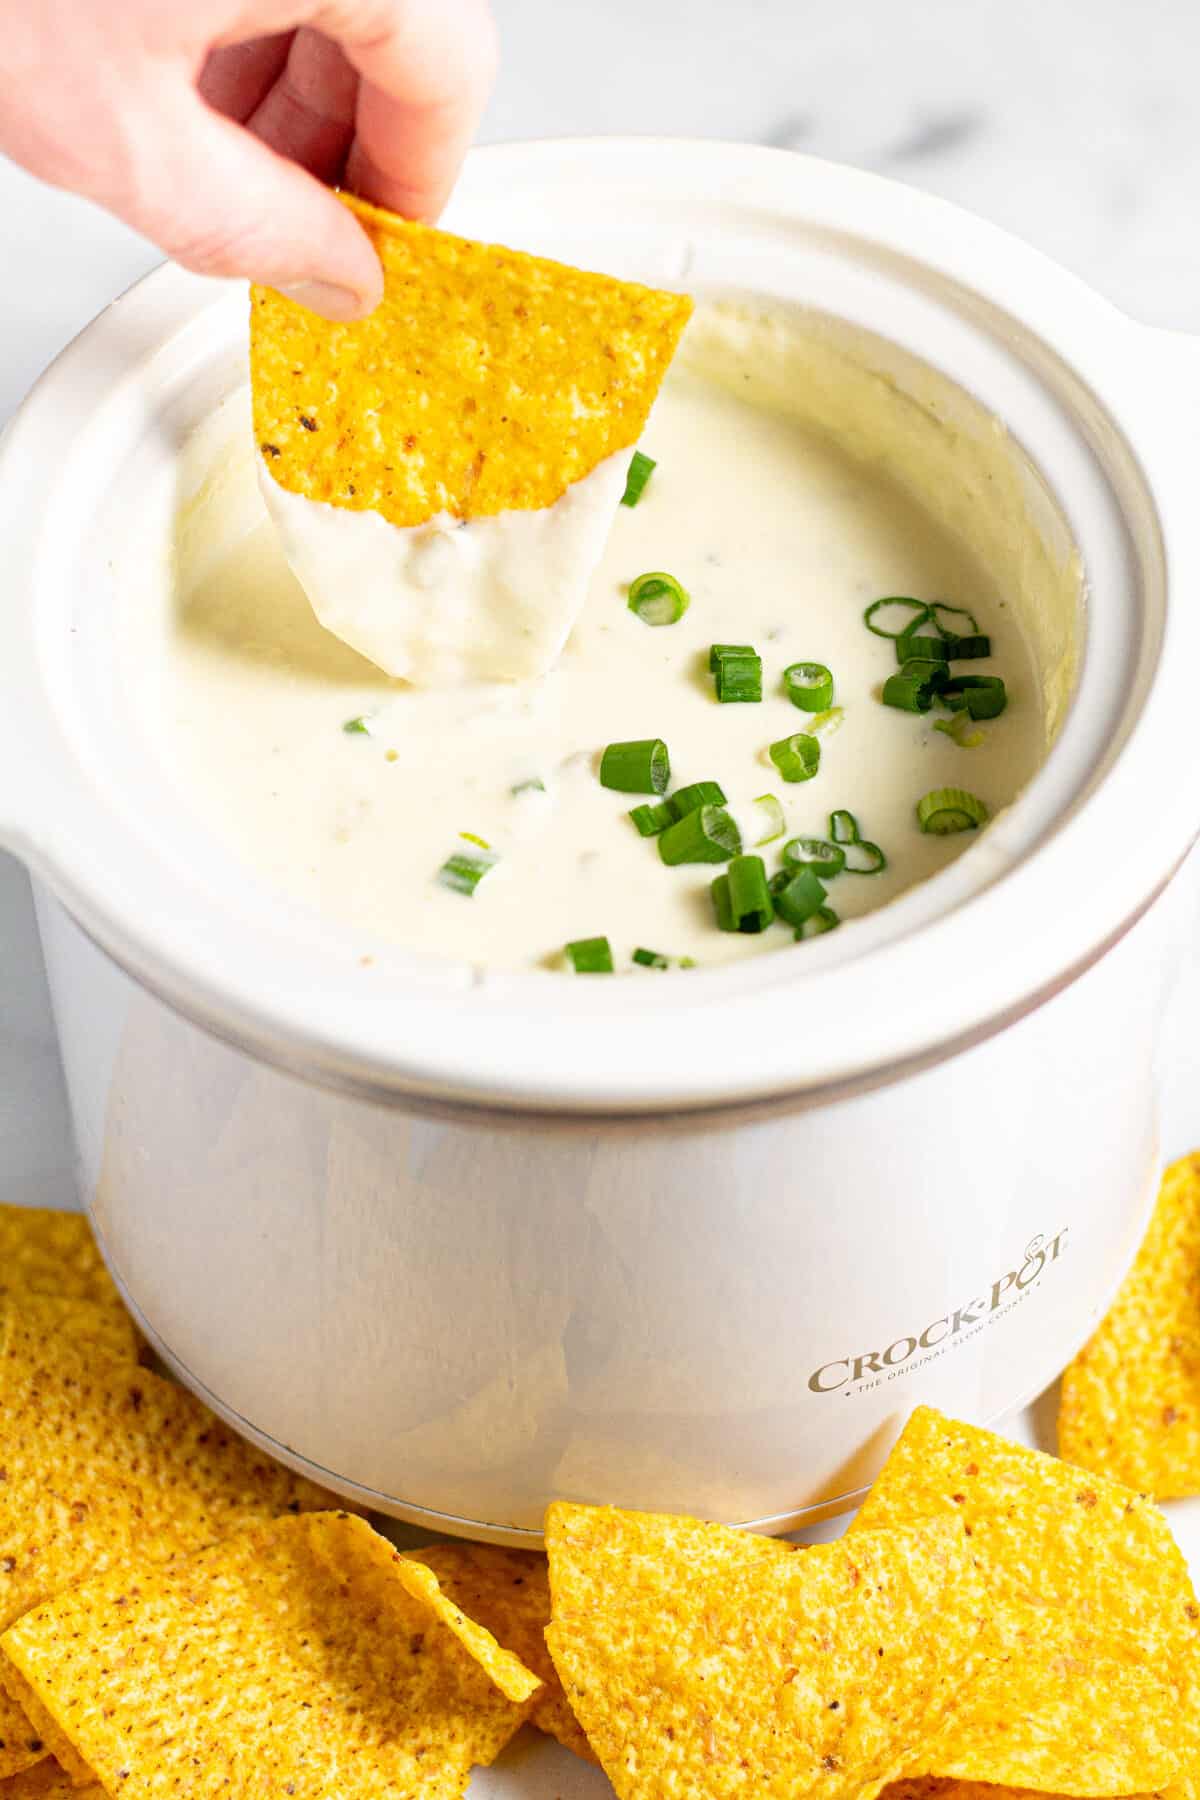 A hand holding a tortilla chip and dipping it into a crock pot of queso 